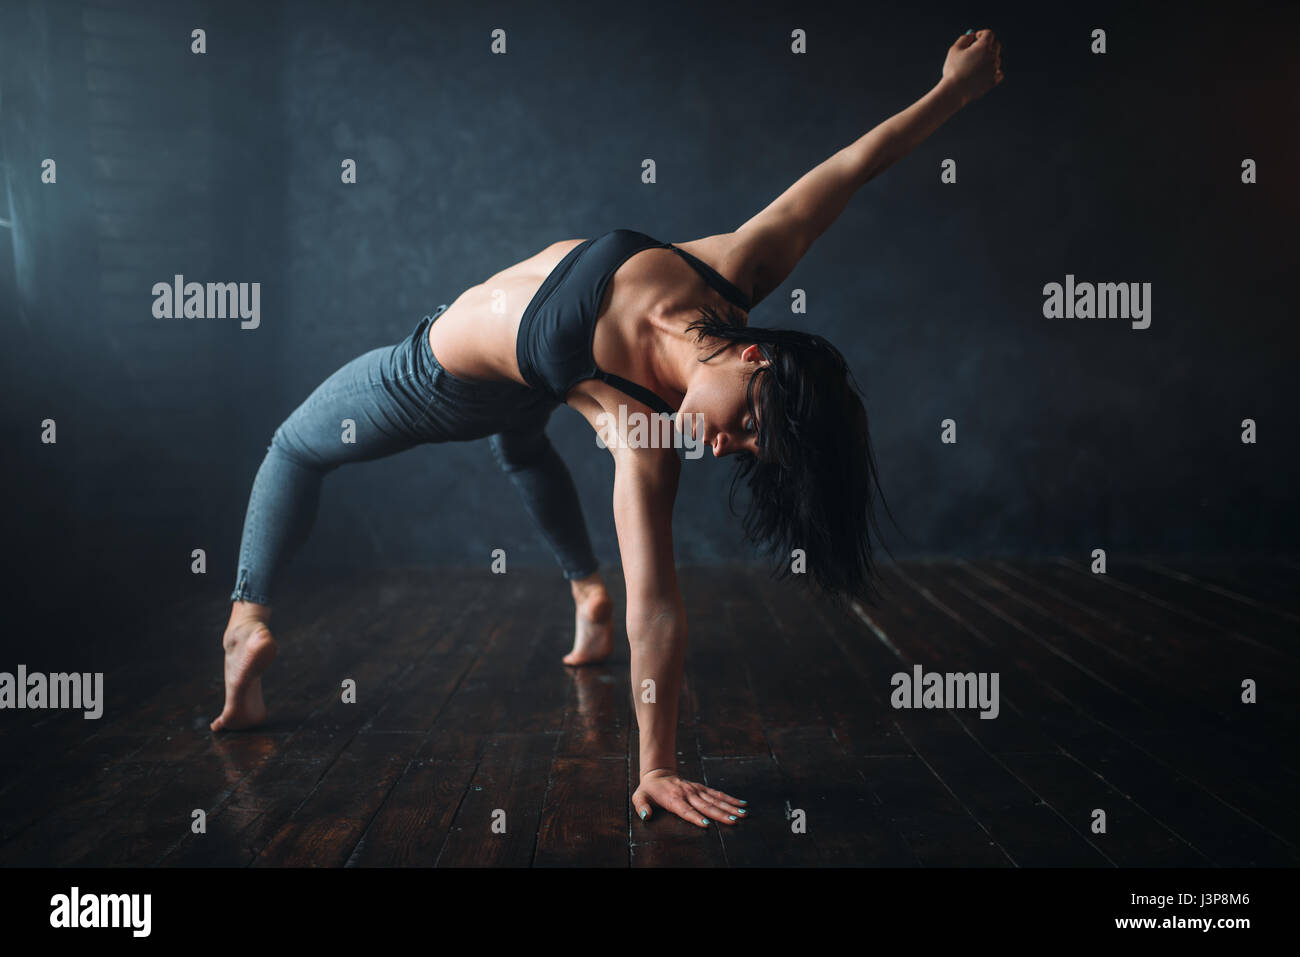 Contemp dancing female performer exercise in dance class. Woman pose in ...